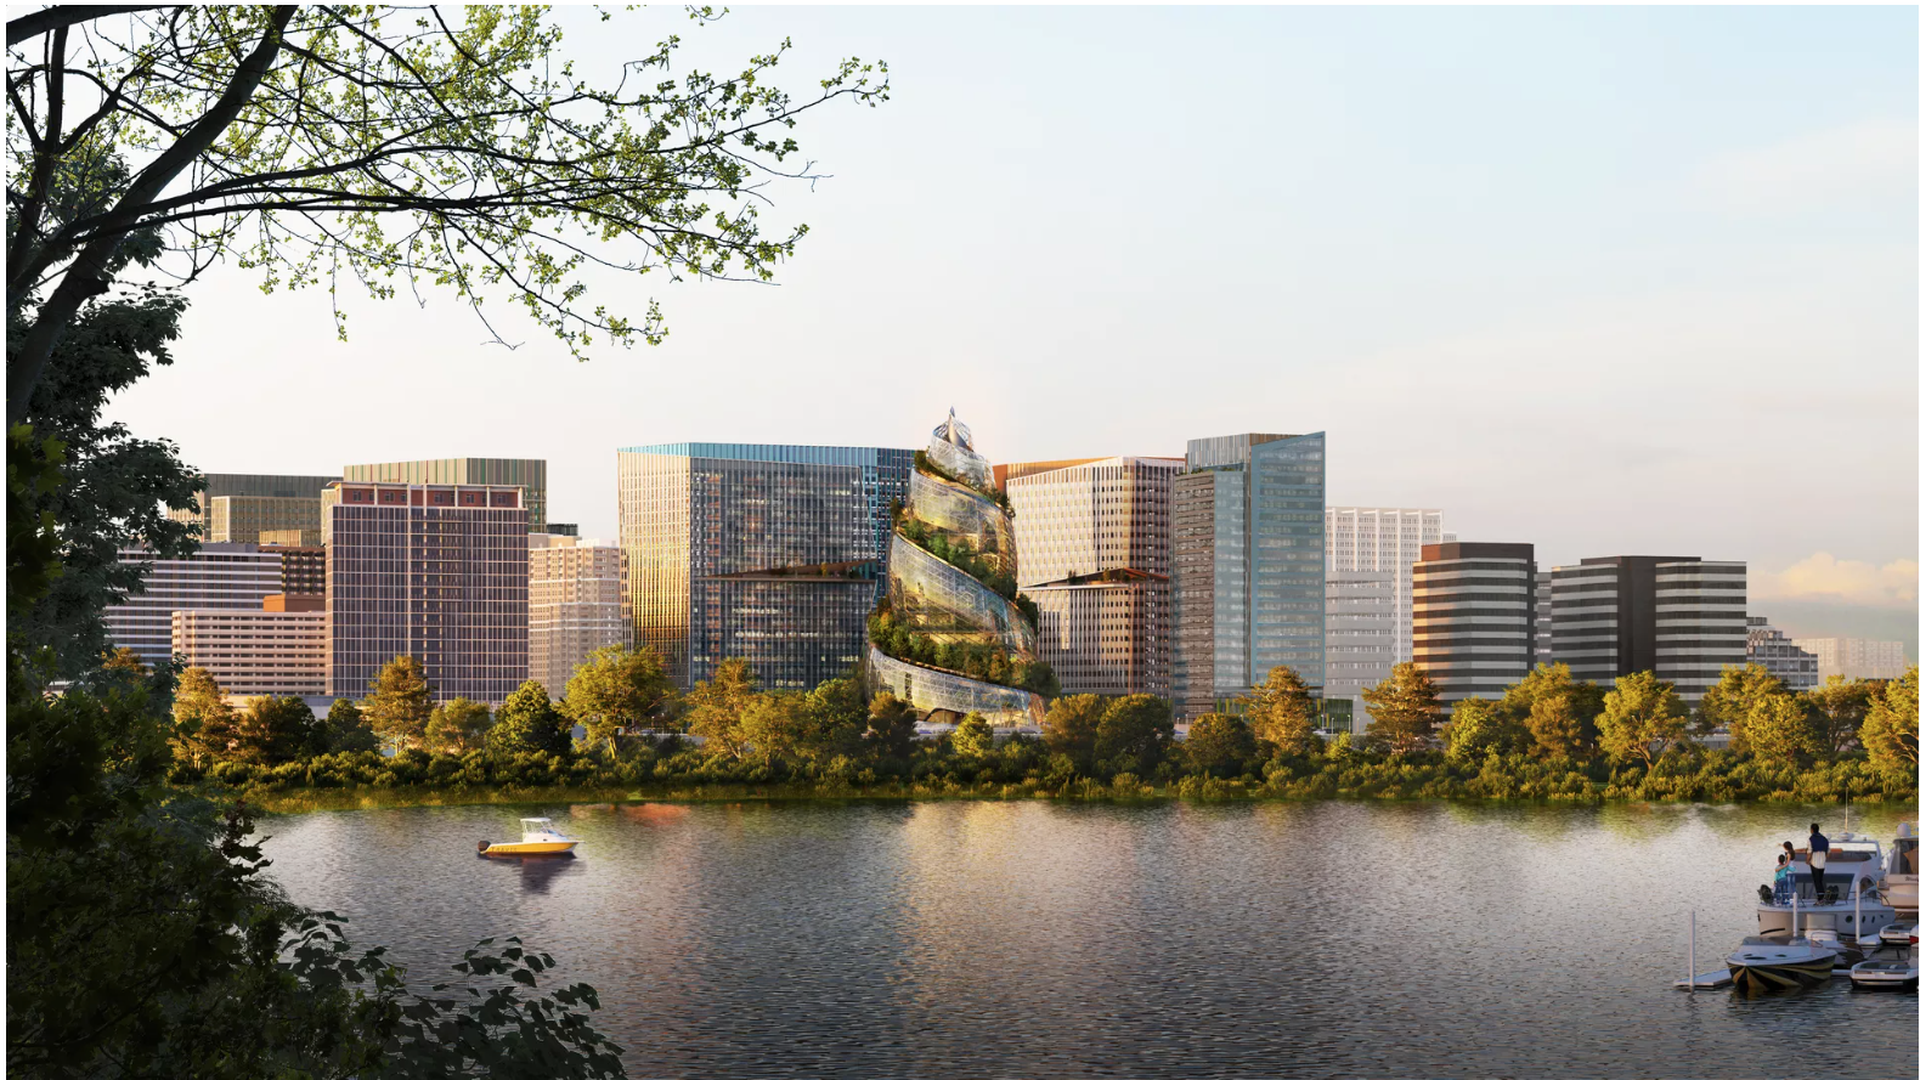 An illustration of how Amazon's "The Helix" building will look in Arlington, Va.